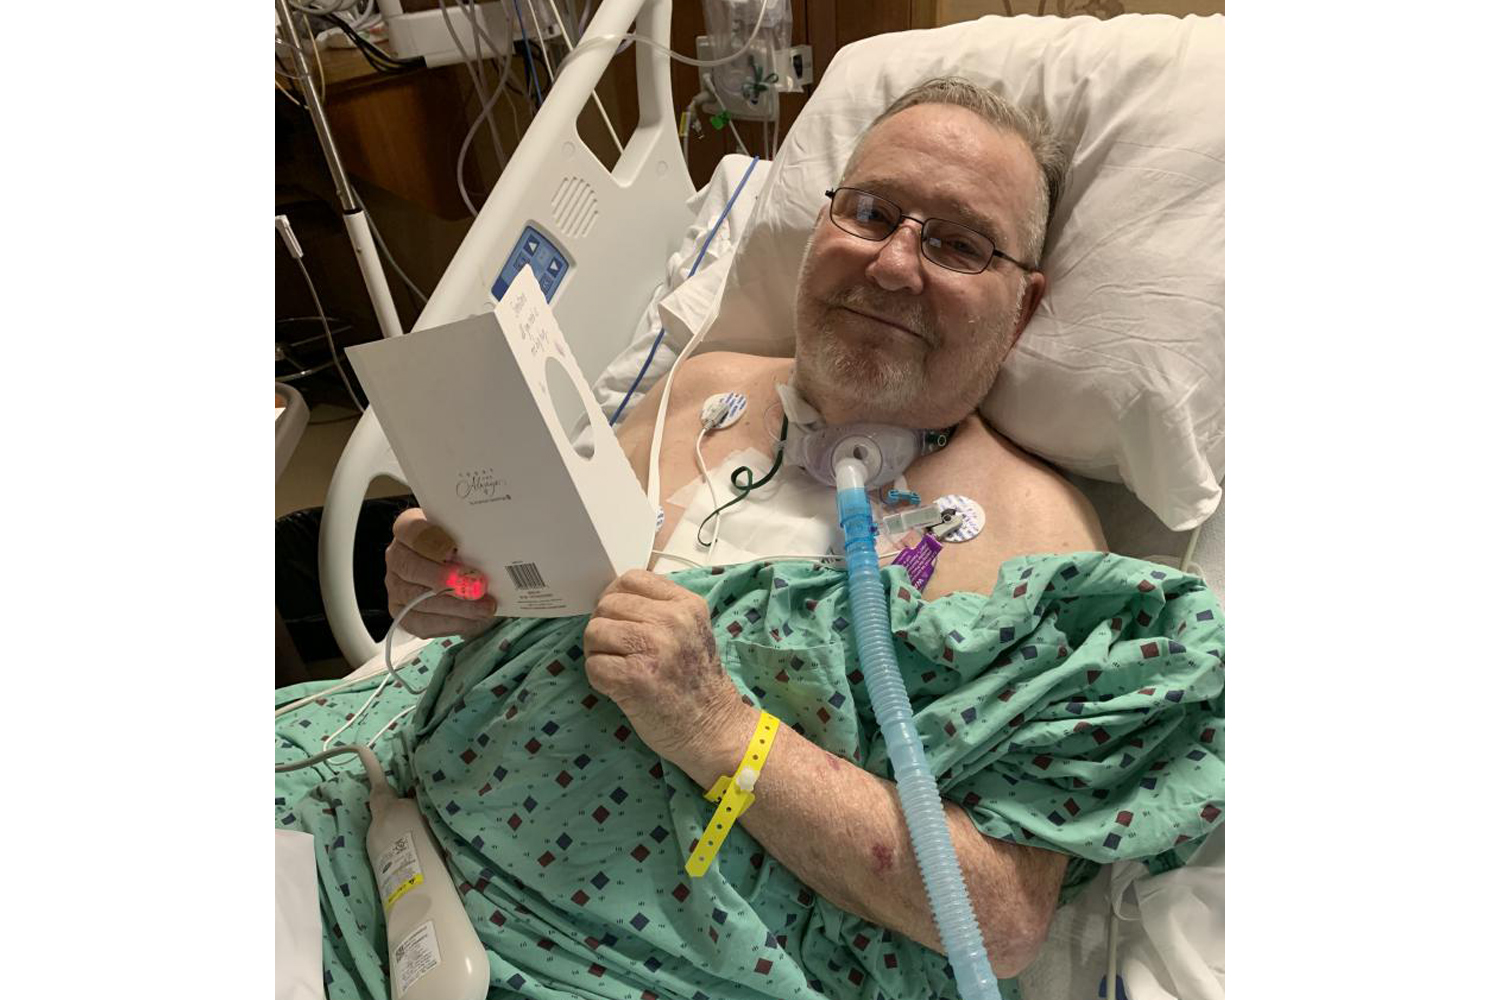 Joe Barton, pictured here in early March, was a resident at Greenwood Healthcare Center while he recuperated from open heart surgery. He died in early June of factors including complications from COVID-19.